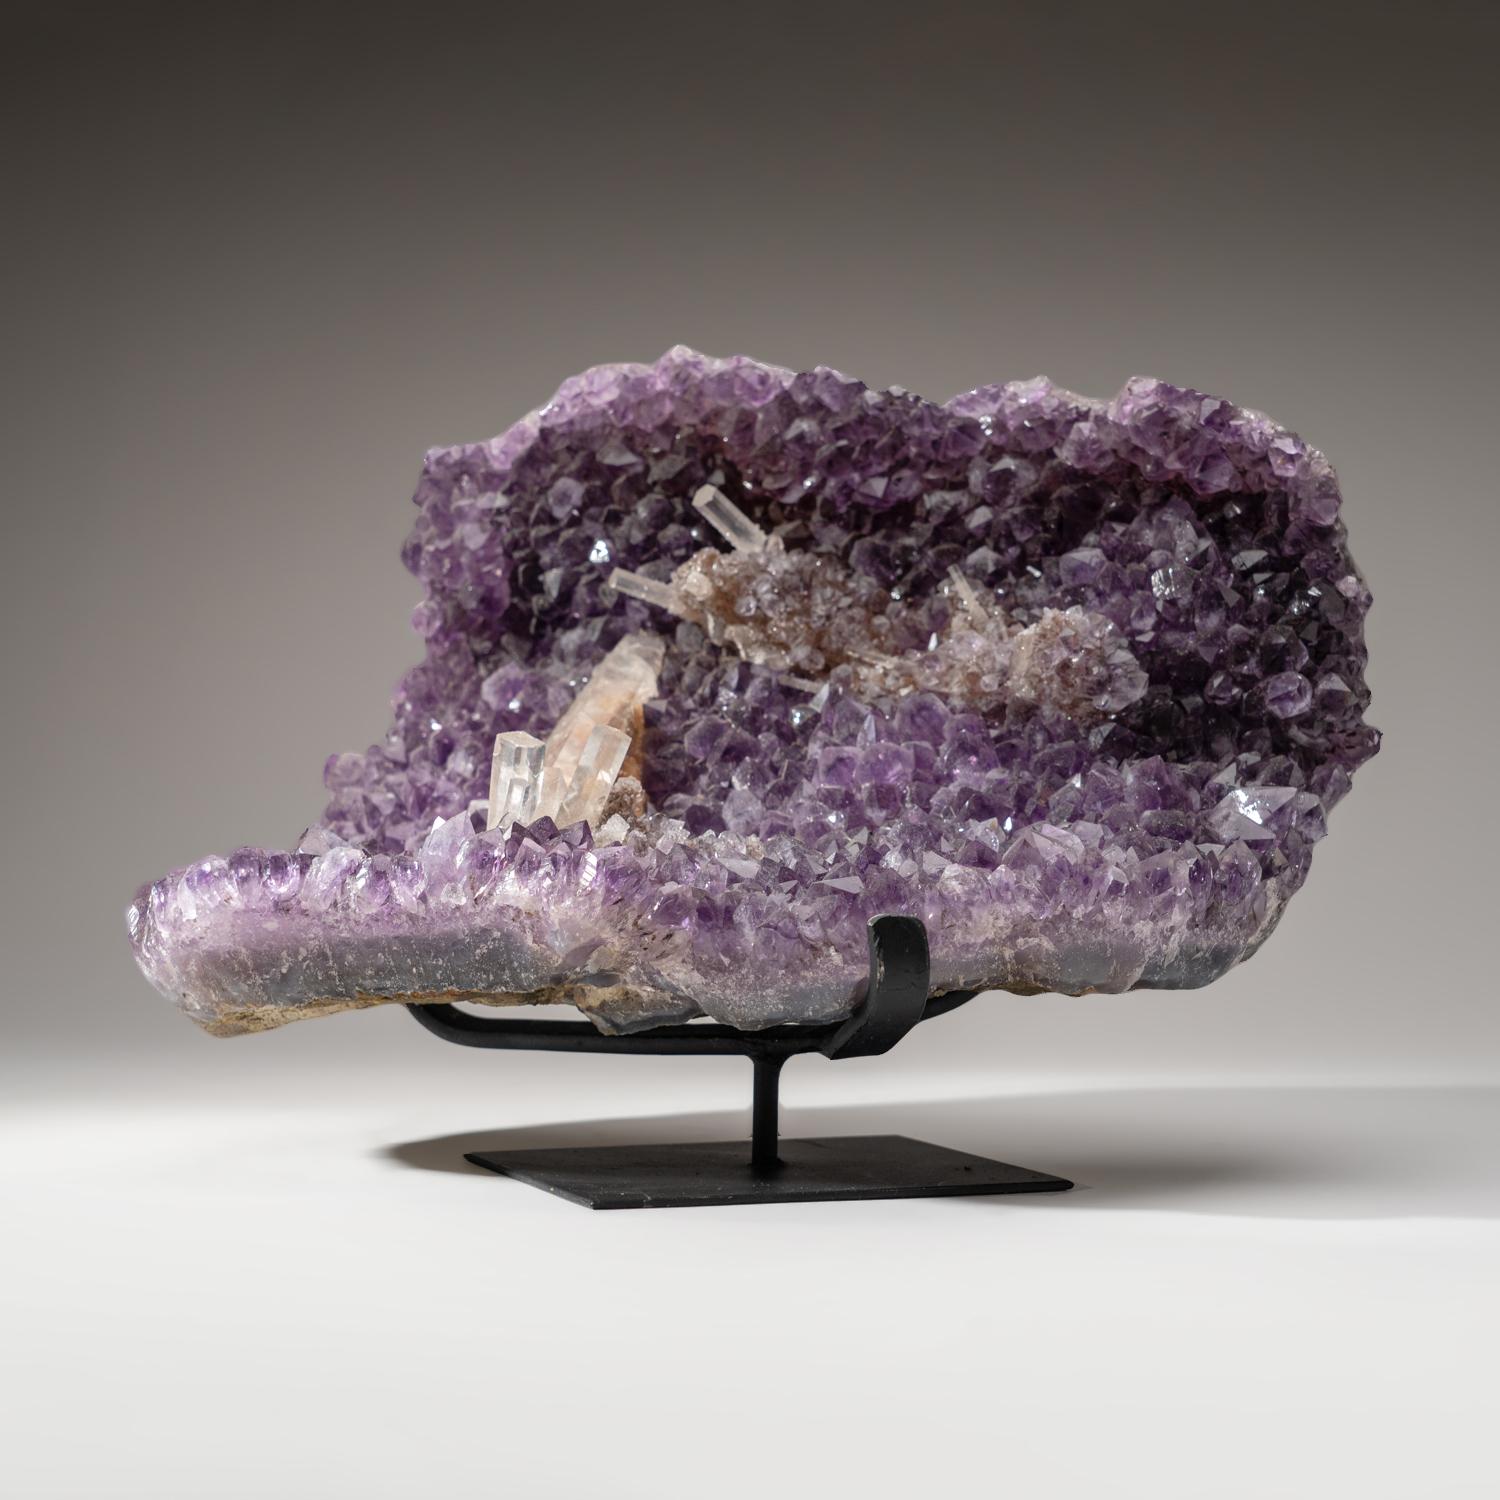 Genuine Amethyst Crystal Cluster with Calcite on Stand from Uruguay (16 lbs) For Sale 1